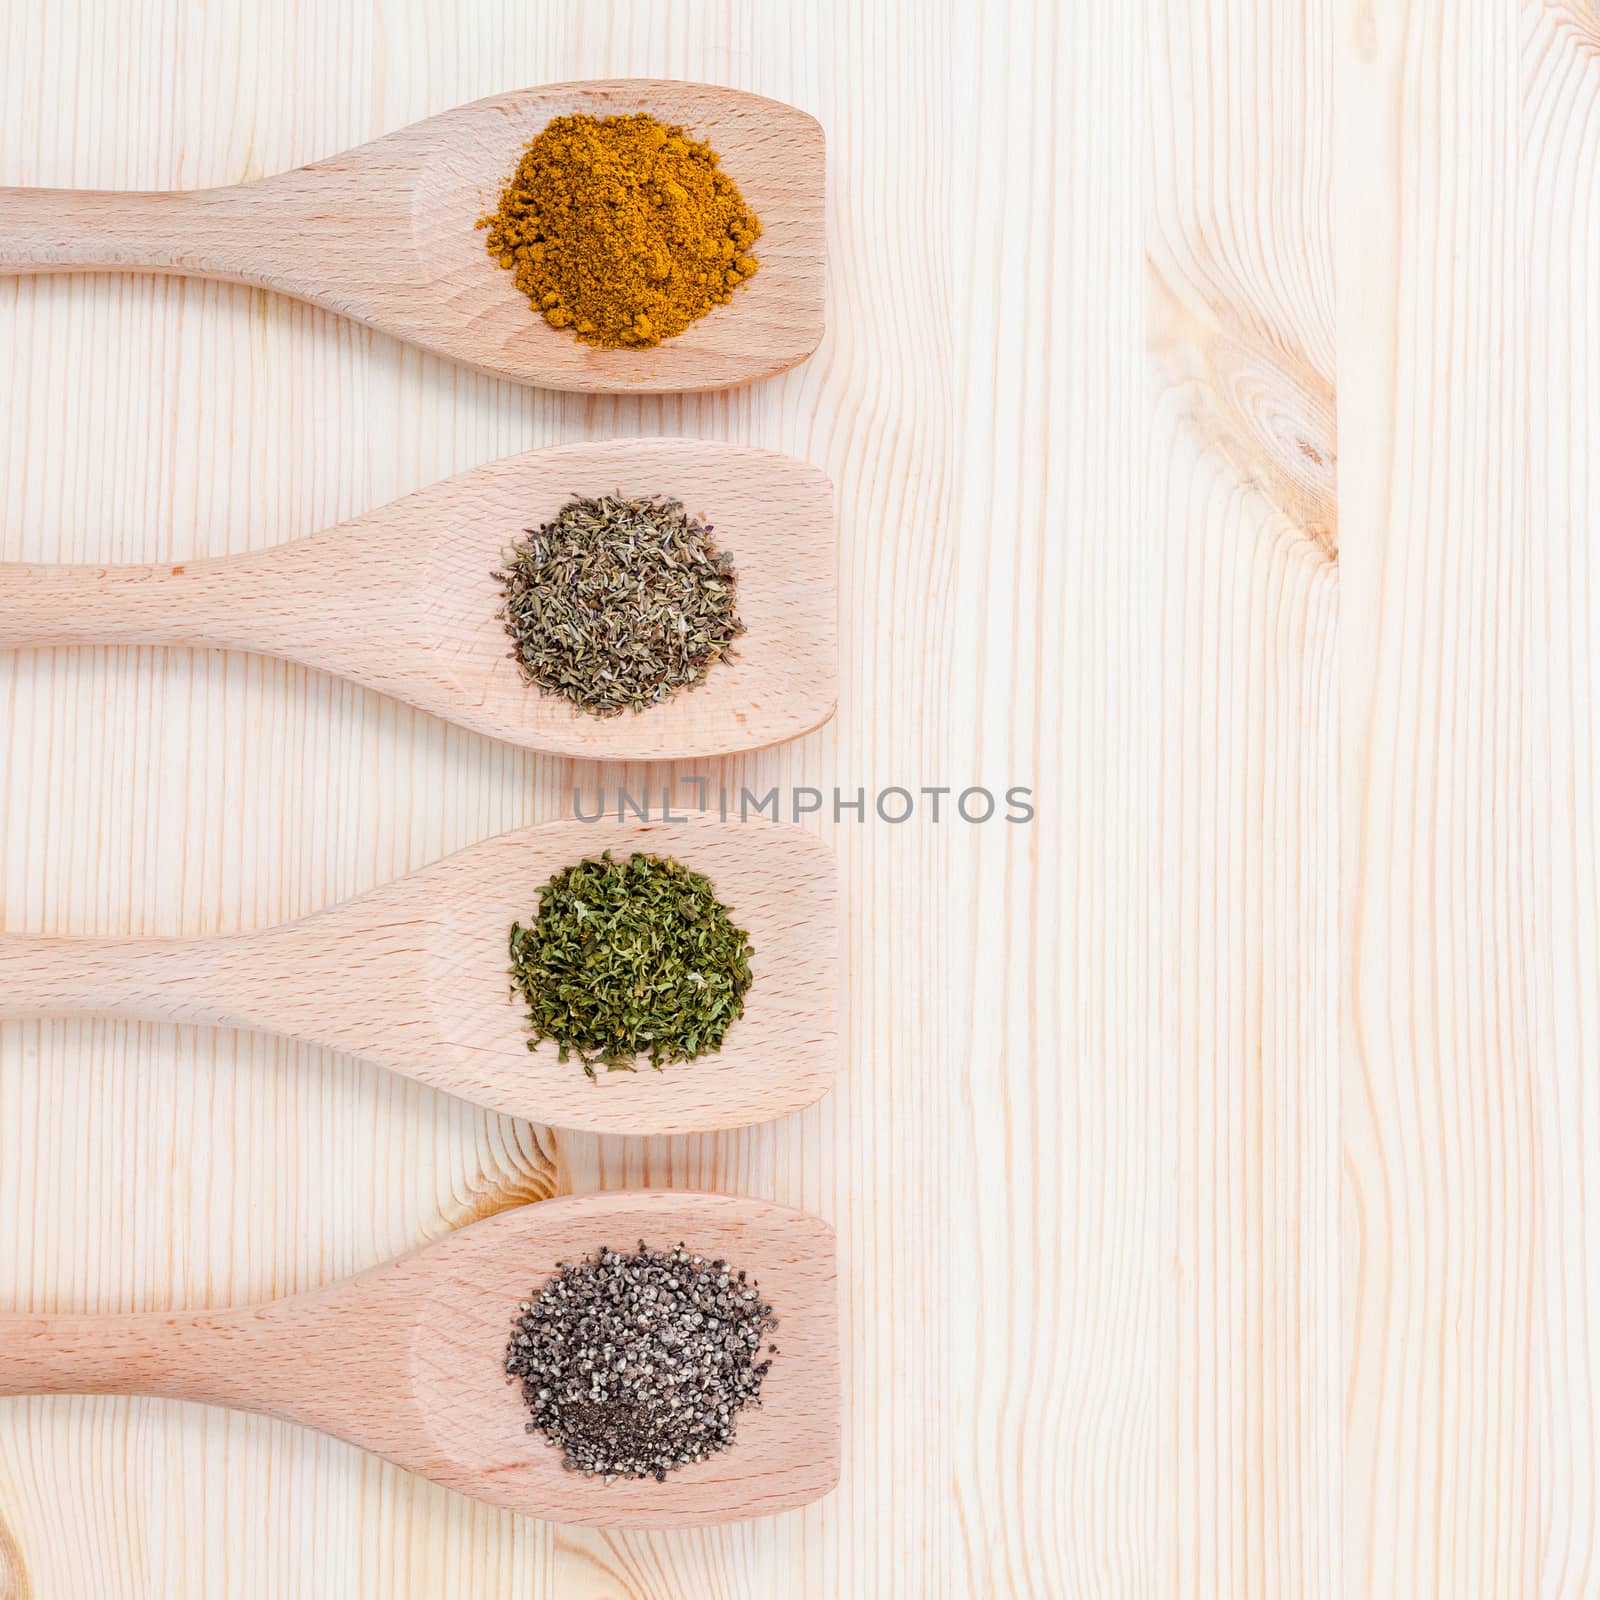 Food Cooking ingredients. Dried Spices curry powder ,black pepper ,powder,oregano and thyme in wooden spoons on rustic wooden background.